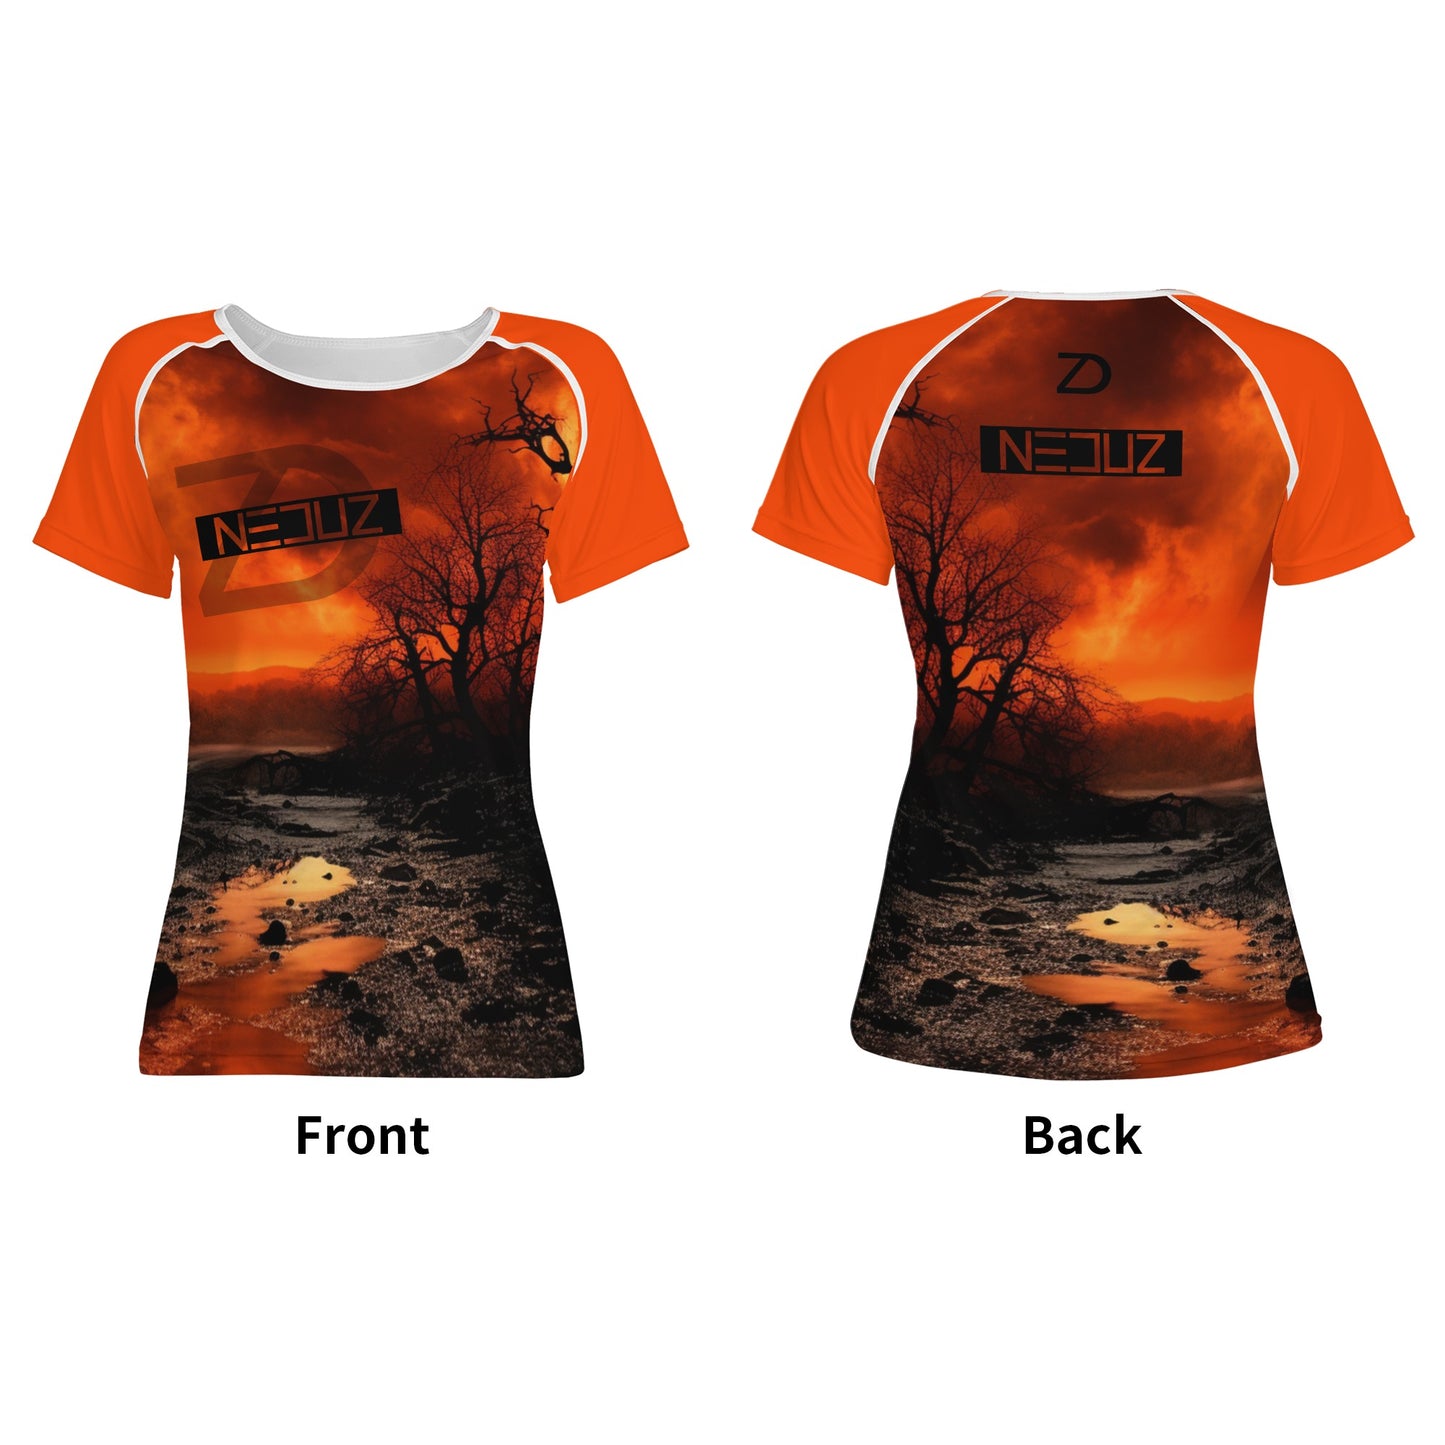 Neduz Womens Crimson Sun T-shirt: Show Off Your Style with Our Unique and High-Quality Design